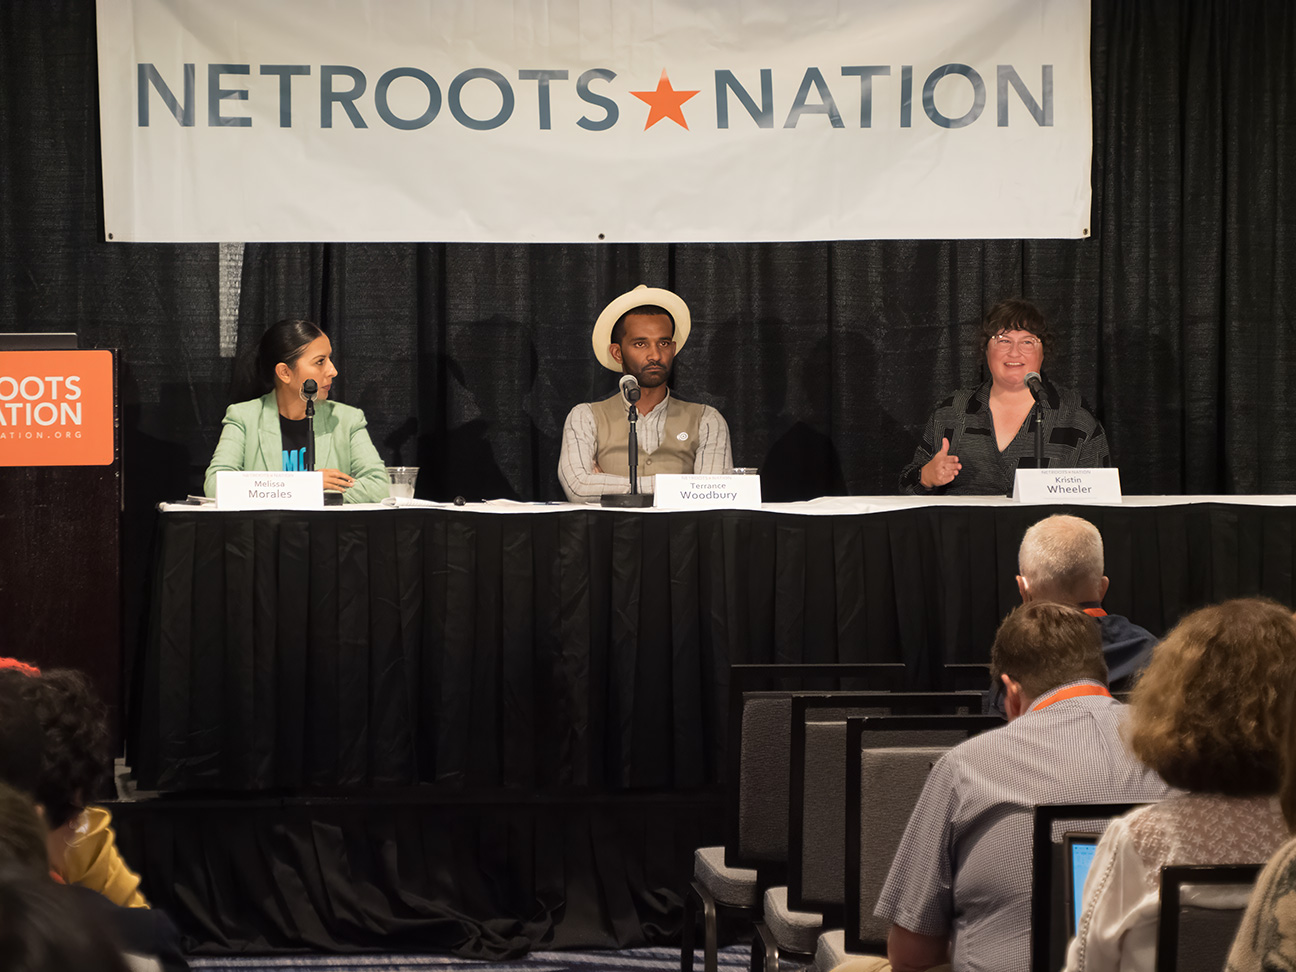 Speakers on the 2023 Netroots Nation panel "A Working People’s Narrative"